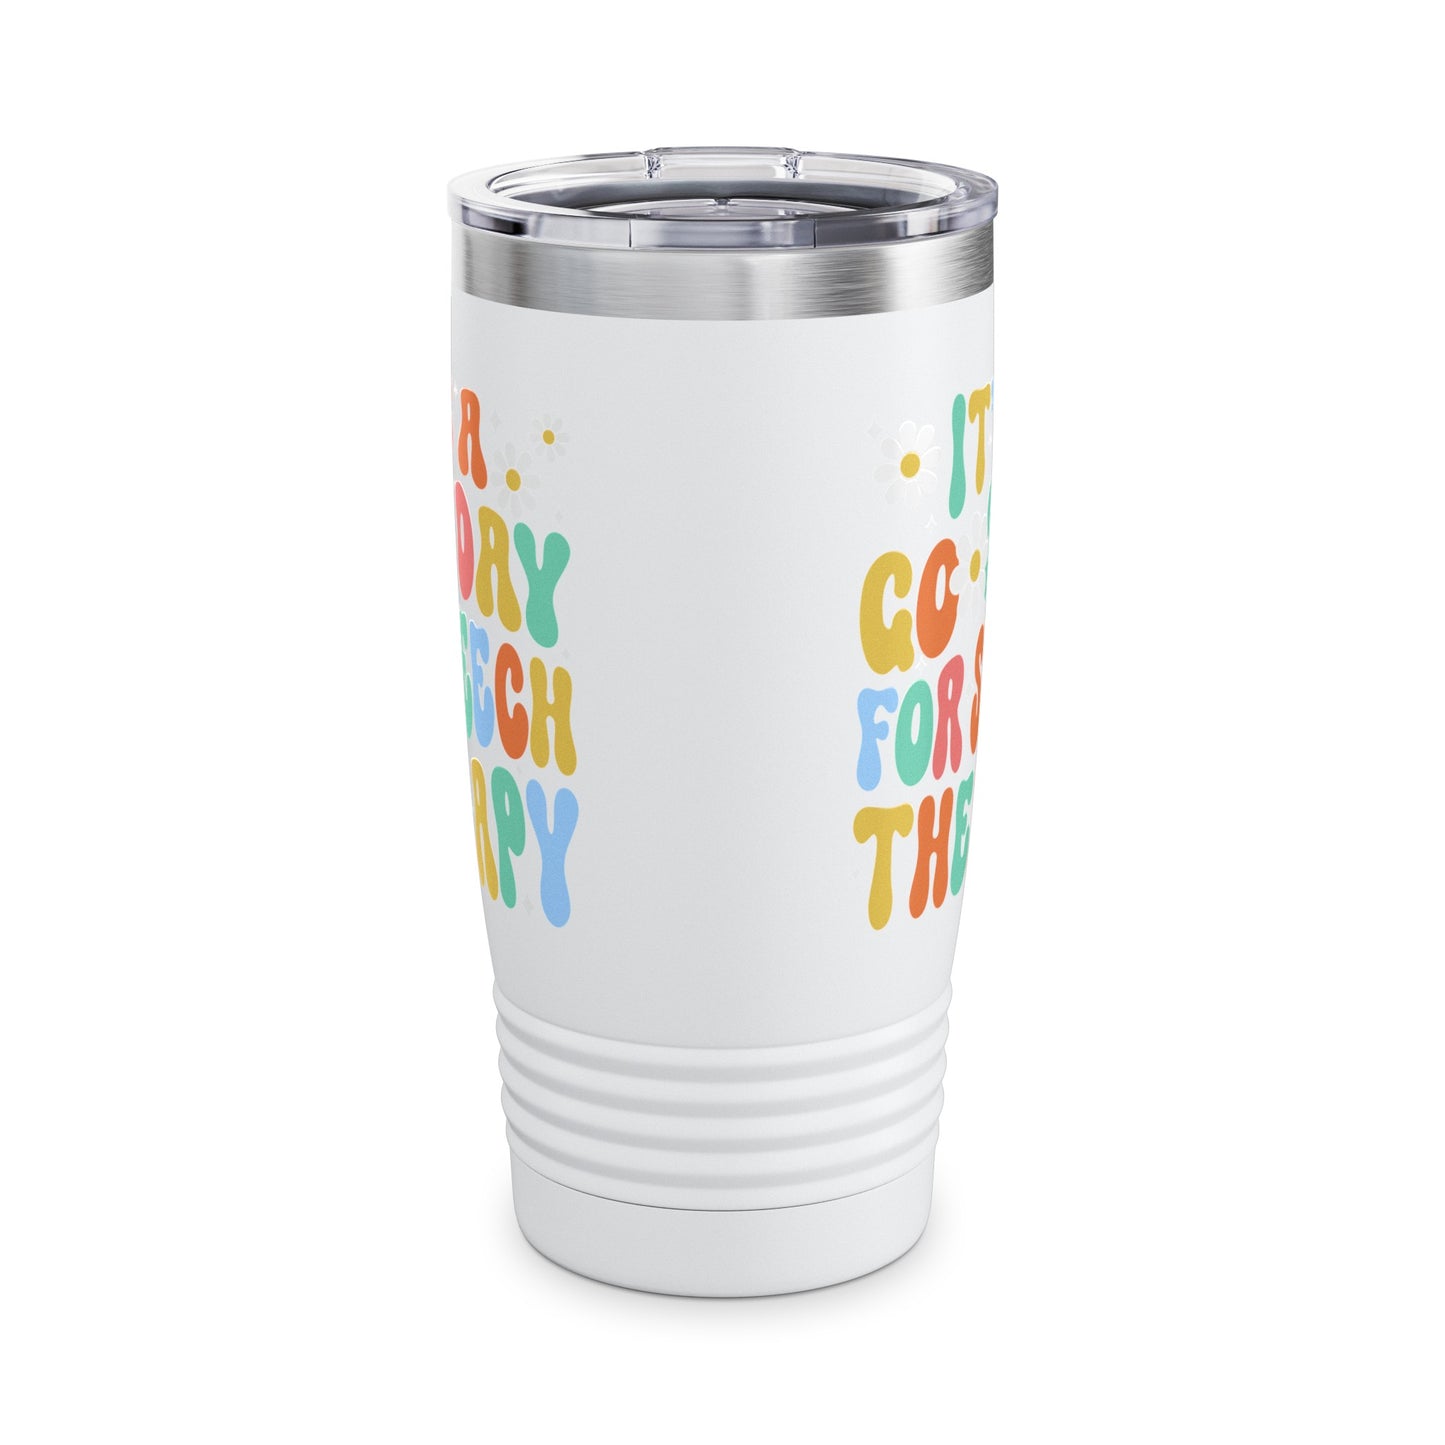 Its A Good Day For Speech Therapy Tumbler, Speech Pathologist Tumbler, SLP Tumbler, Therapist Tumbler, Therapy Tumbler